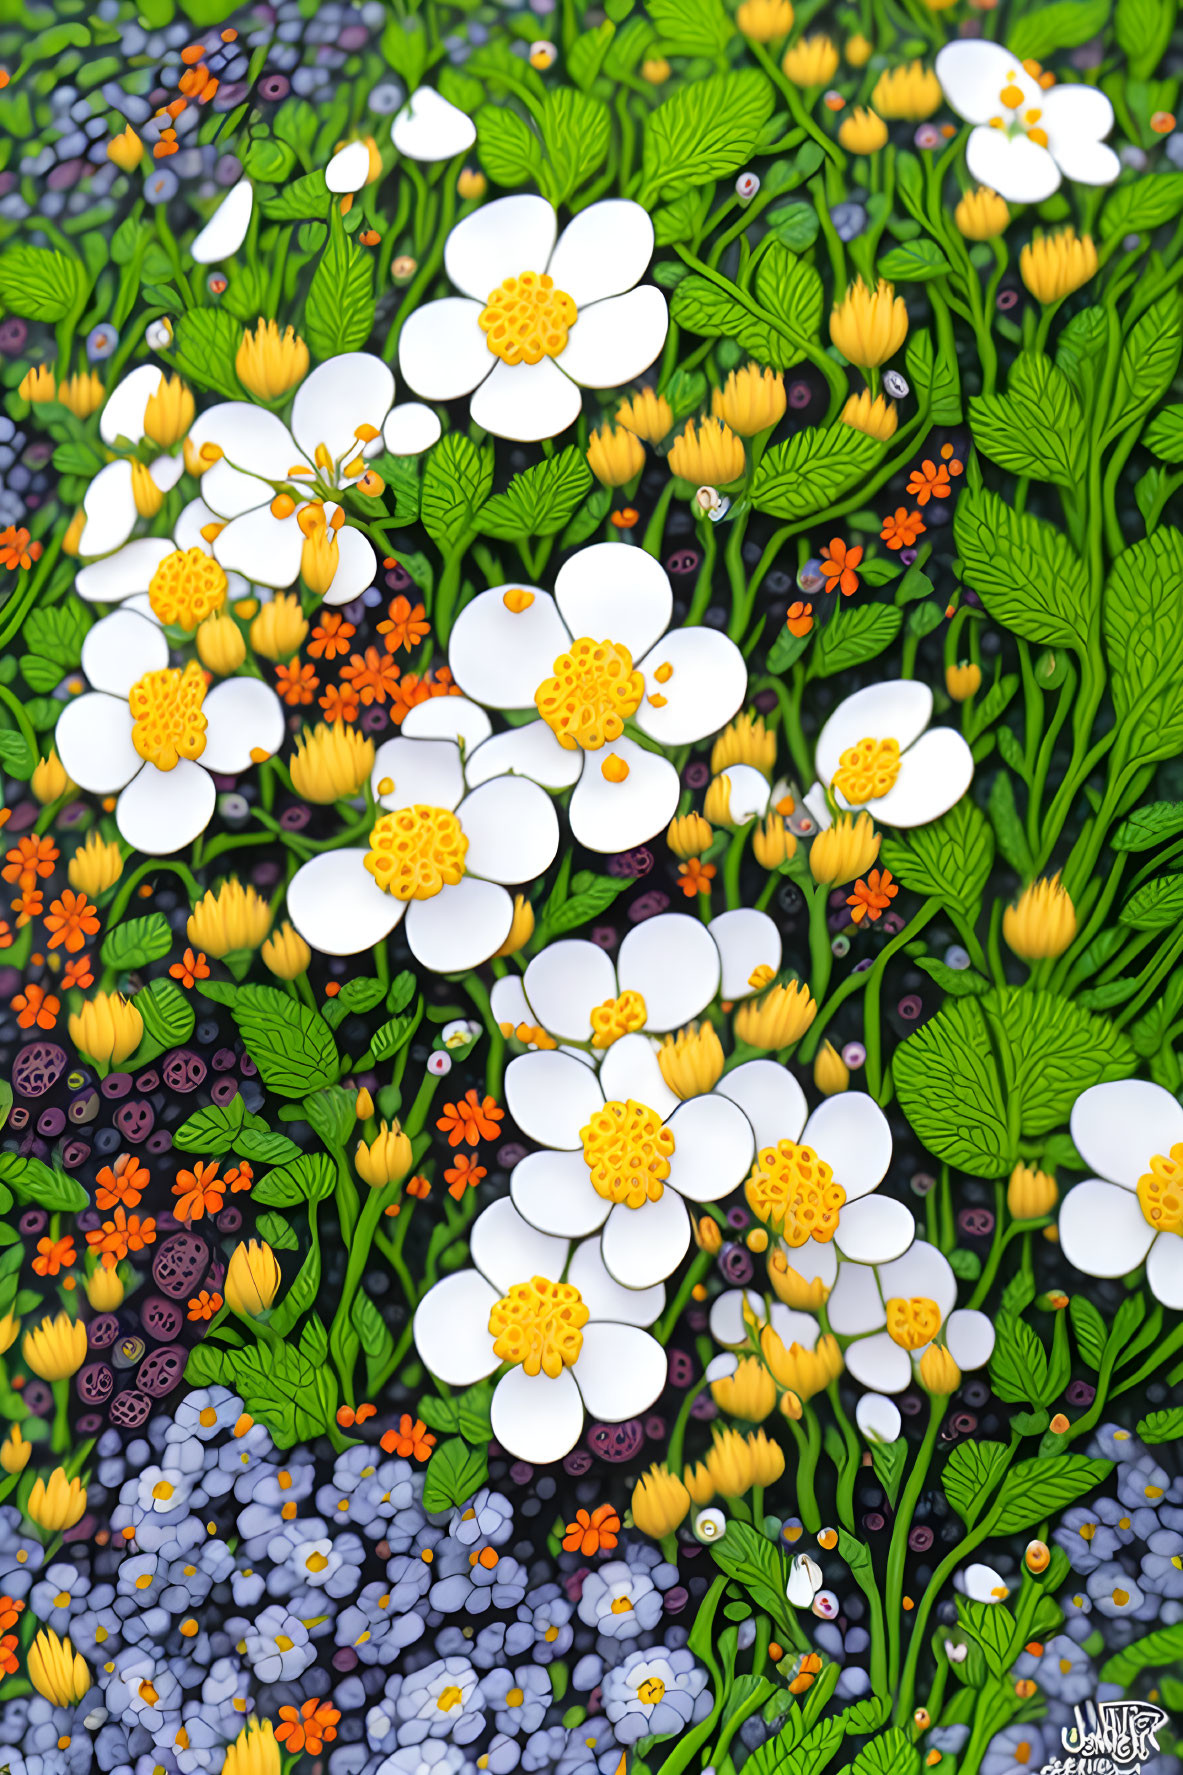 Colorful Floral Pattern with White, Green, Orange, and Blue Blossoms